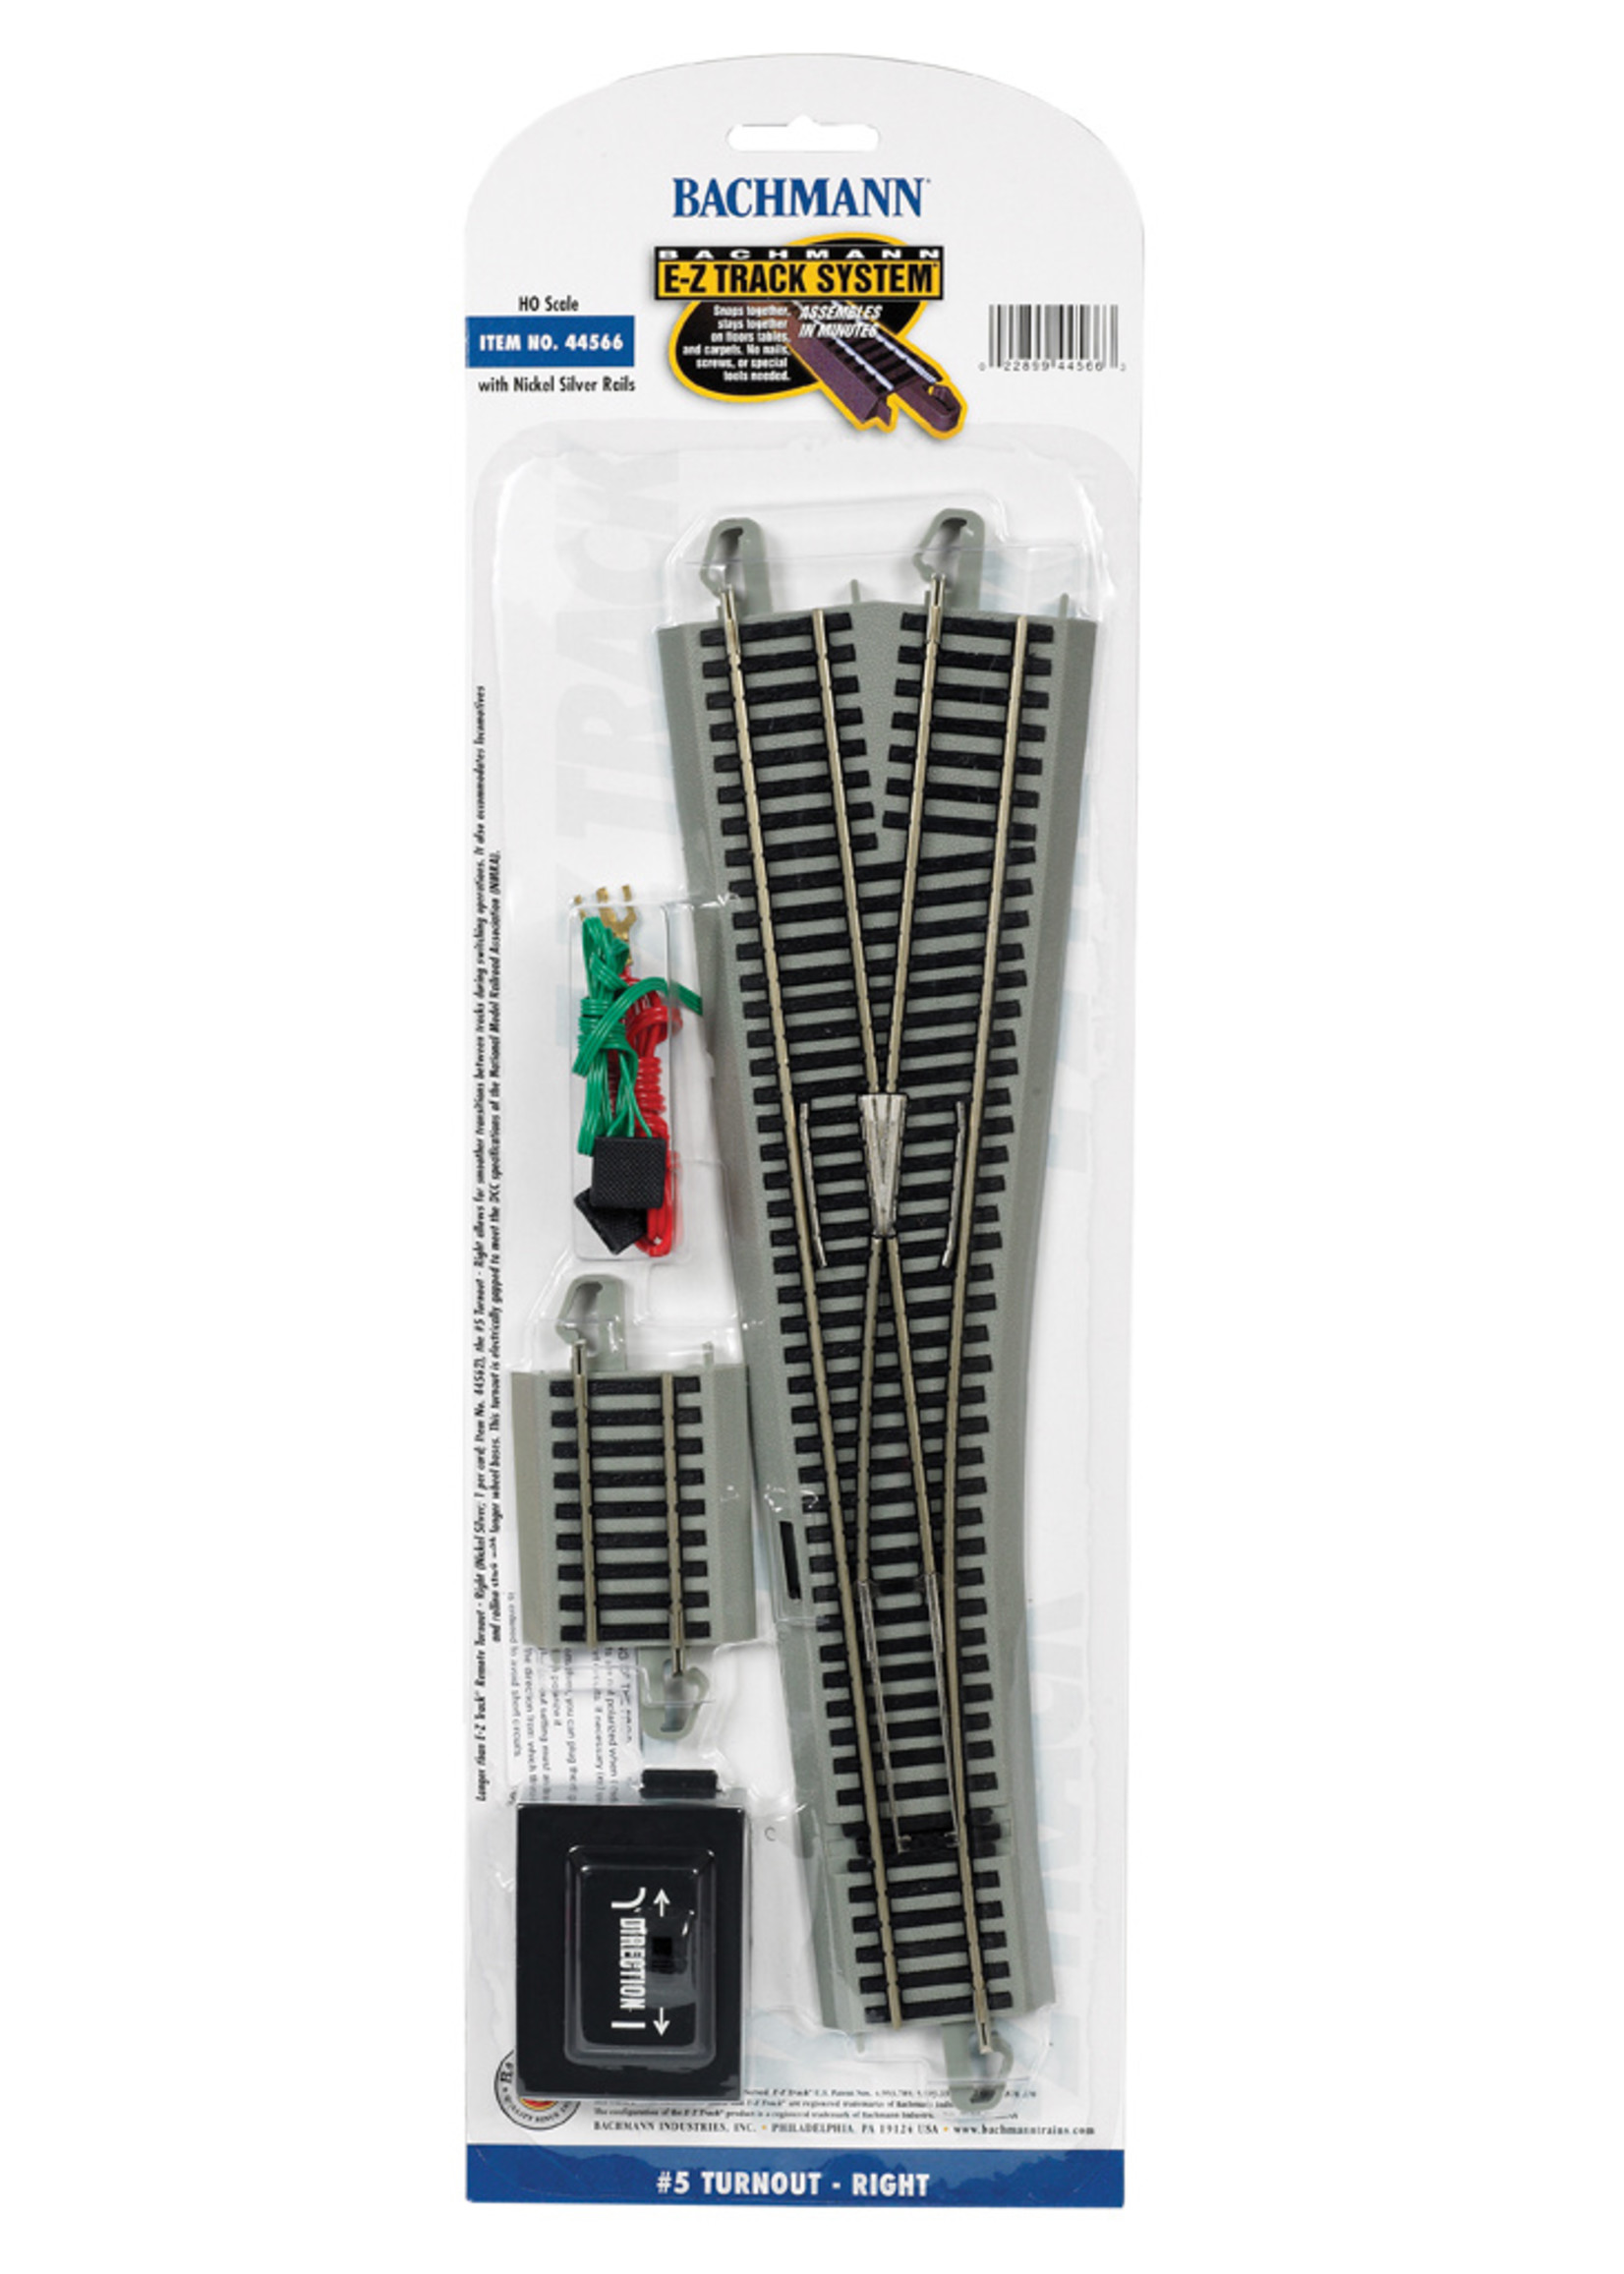 Bachmann #5 Turnout Right HO Scale EZ Track